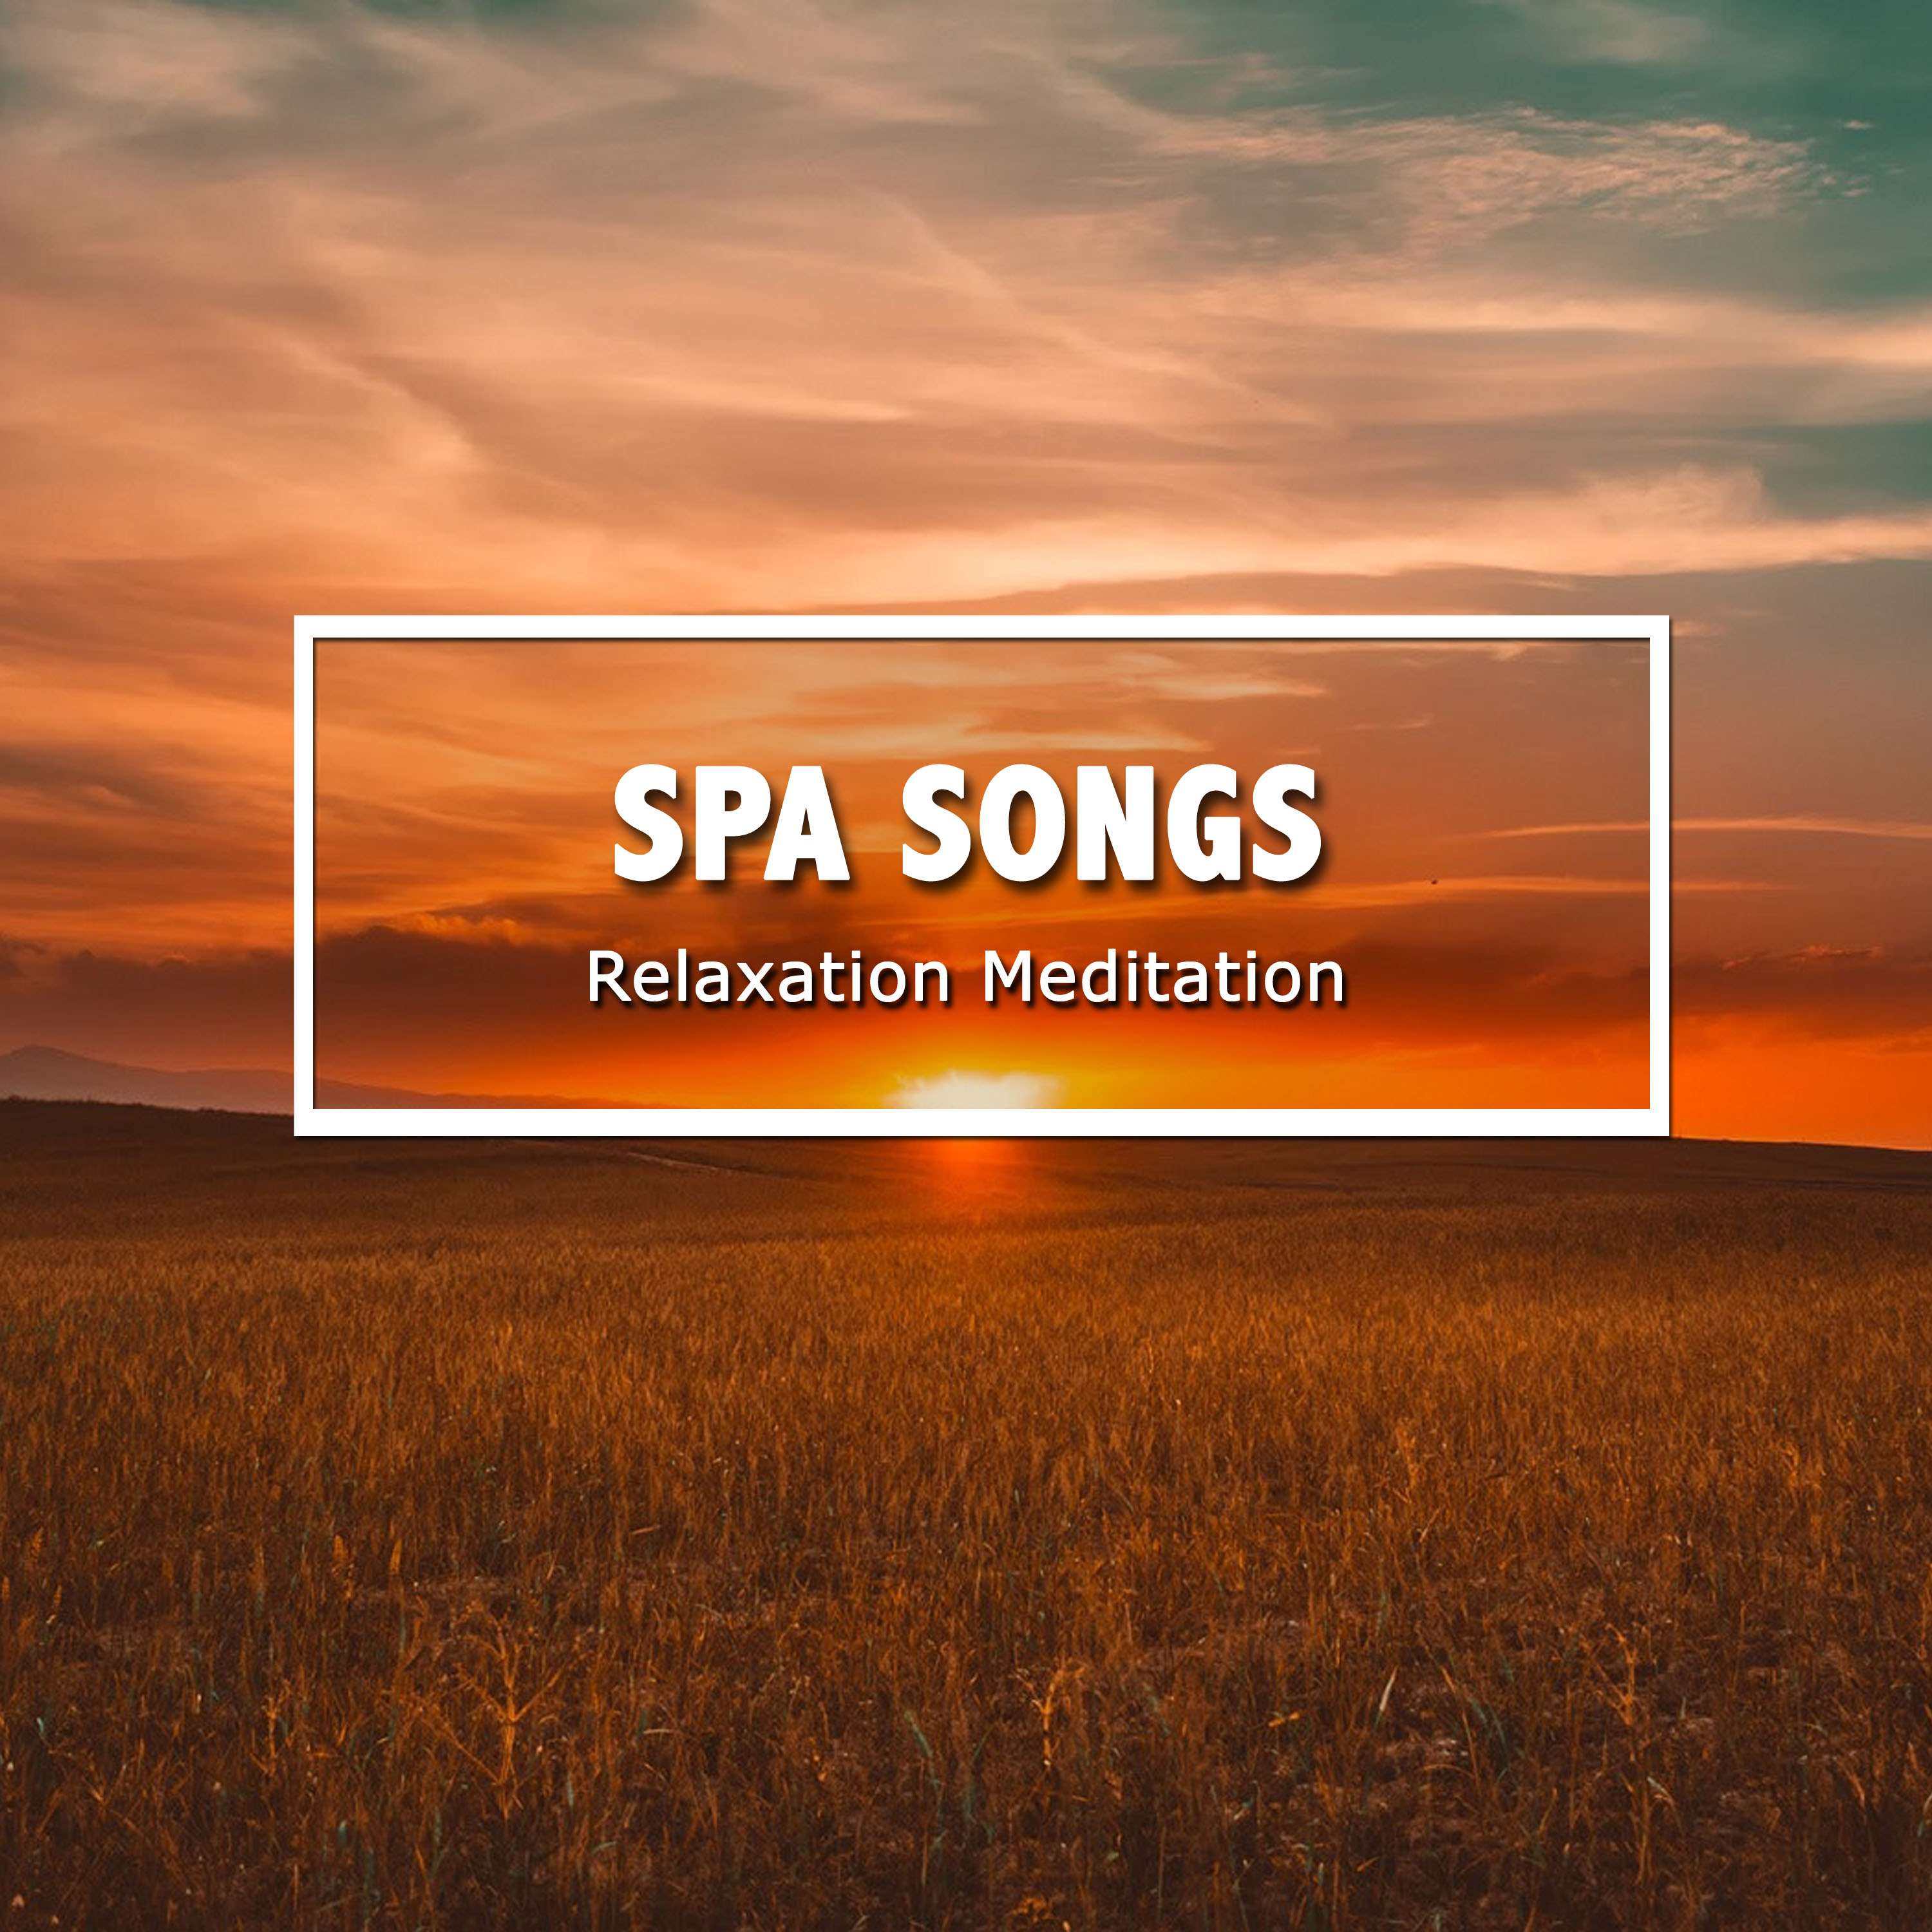 14 Relaxation Meditation Spa Songs